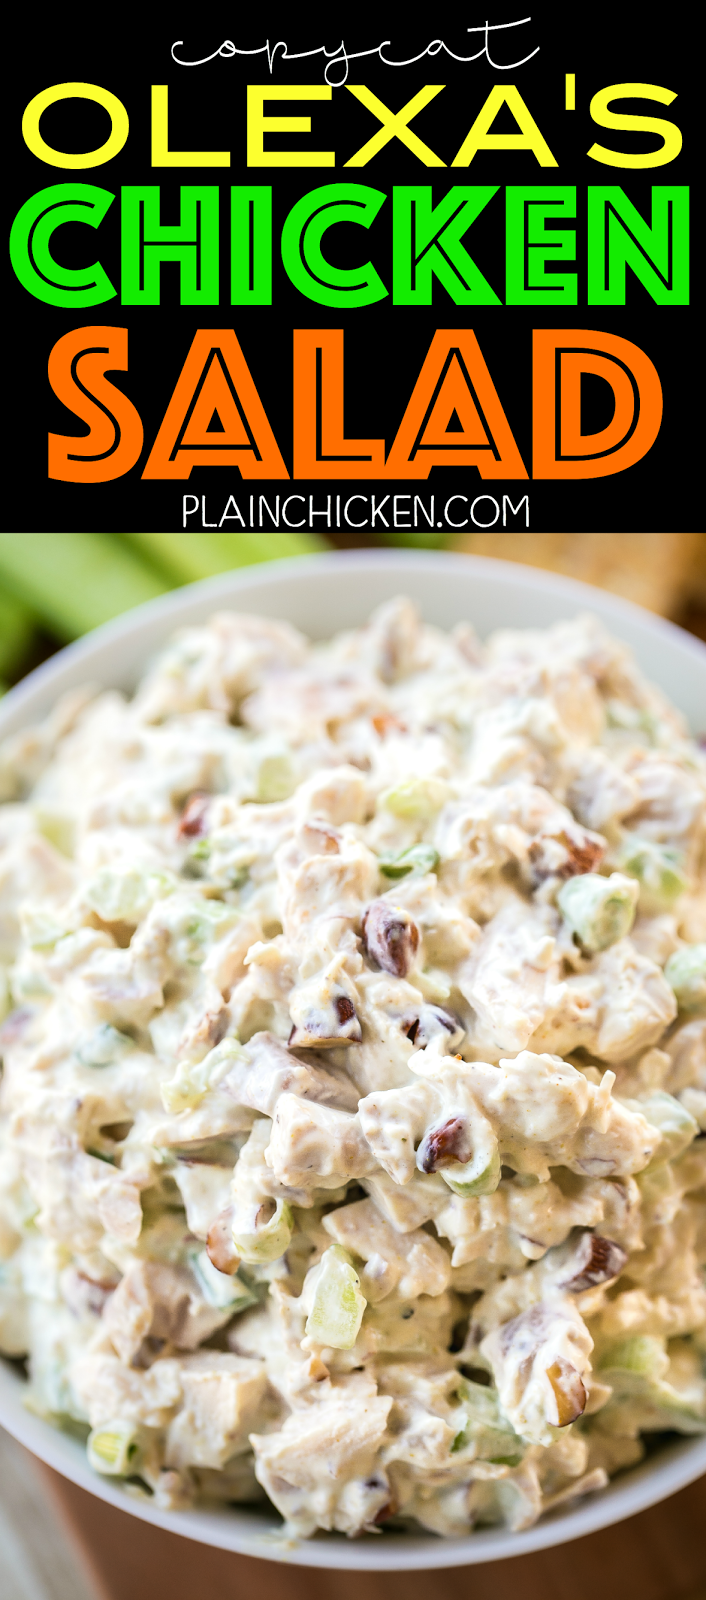 Olexa's Chicken Salad - This is THE BEST chicken salad EVER!! SO good!!! Chicken, mayo, sour cream, celery, curry, salt, pepper, lemon juice, green onions and smoked almonds. Copycat recipe from the Birmingham, AL restaurant. I think this version is better than the original. Keeps for up to 5 days in the fridge. 